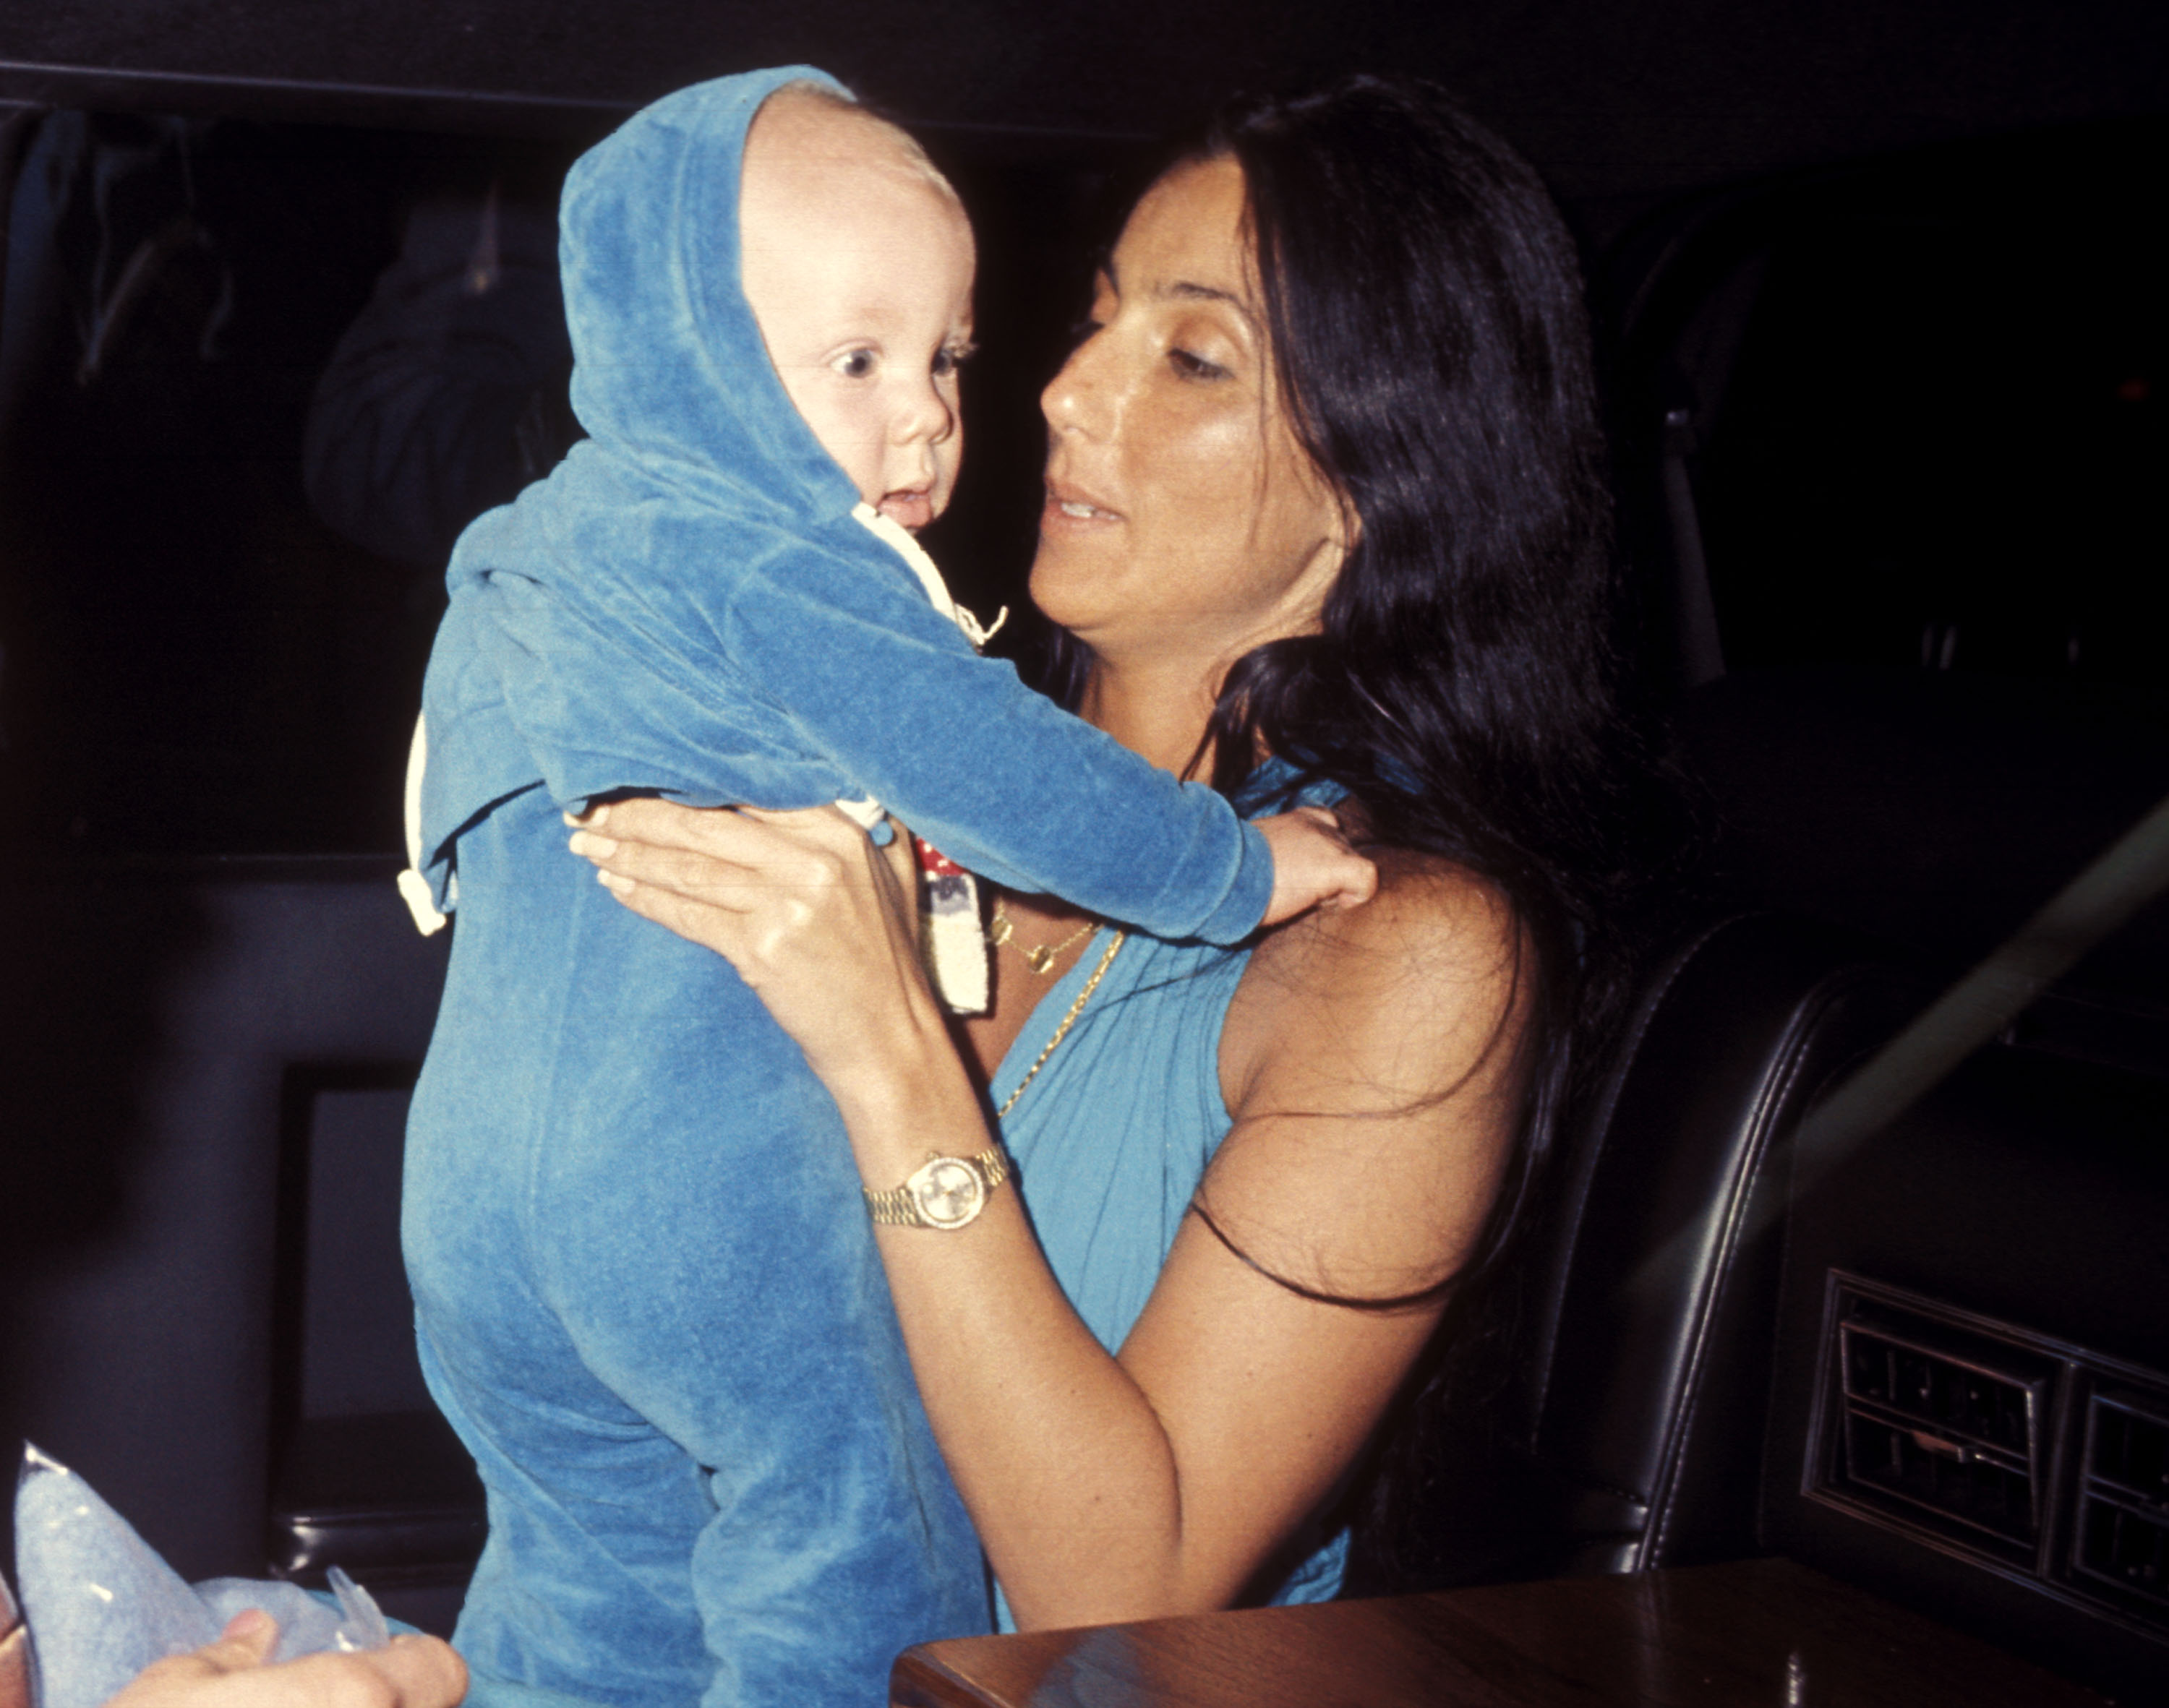 Cher and Elijah Blue Allman at Los Angeles International Airport in Los Angeles, California, on March 20, 1977. | Source: Getty Images